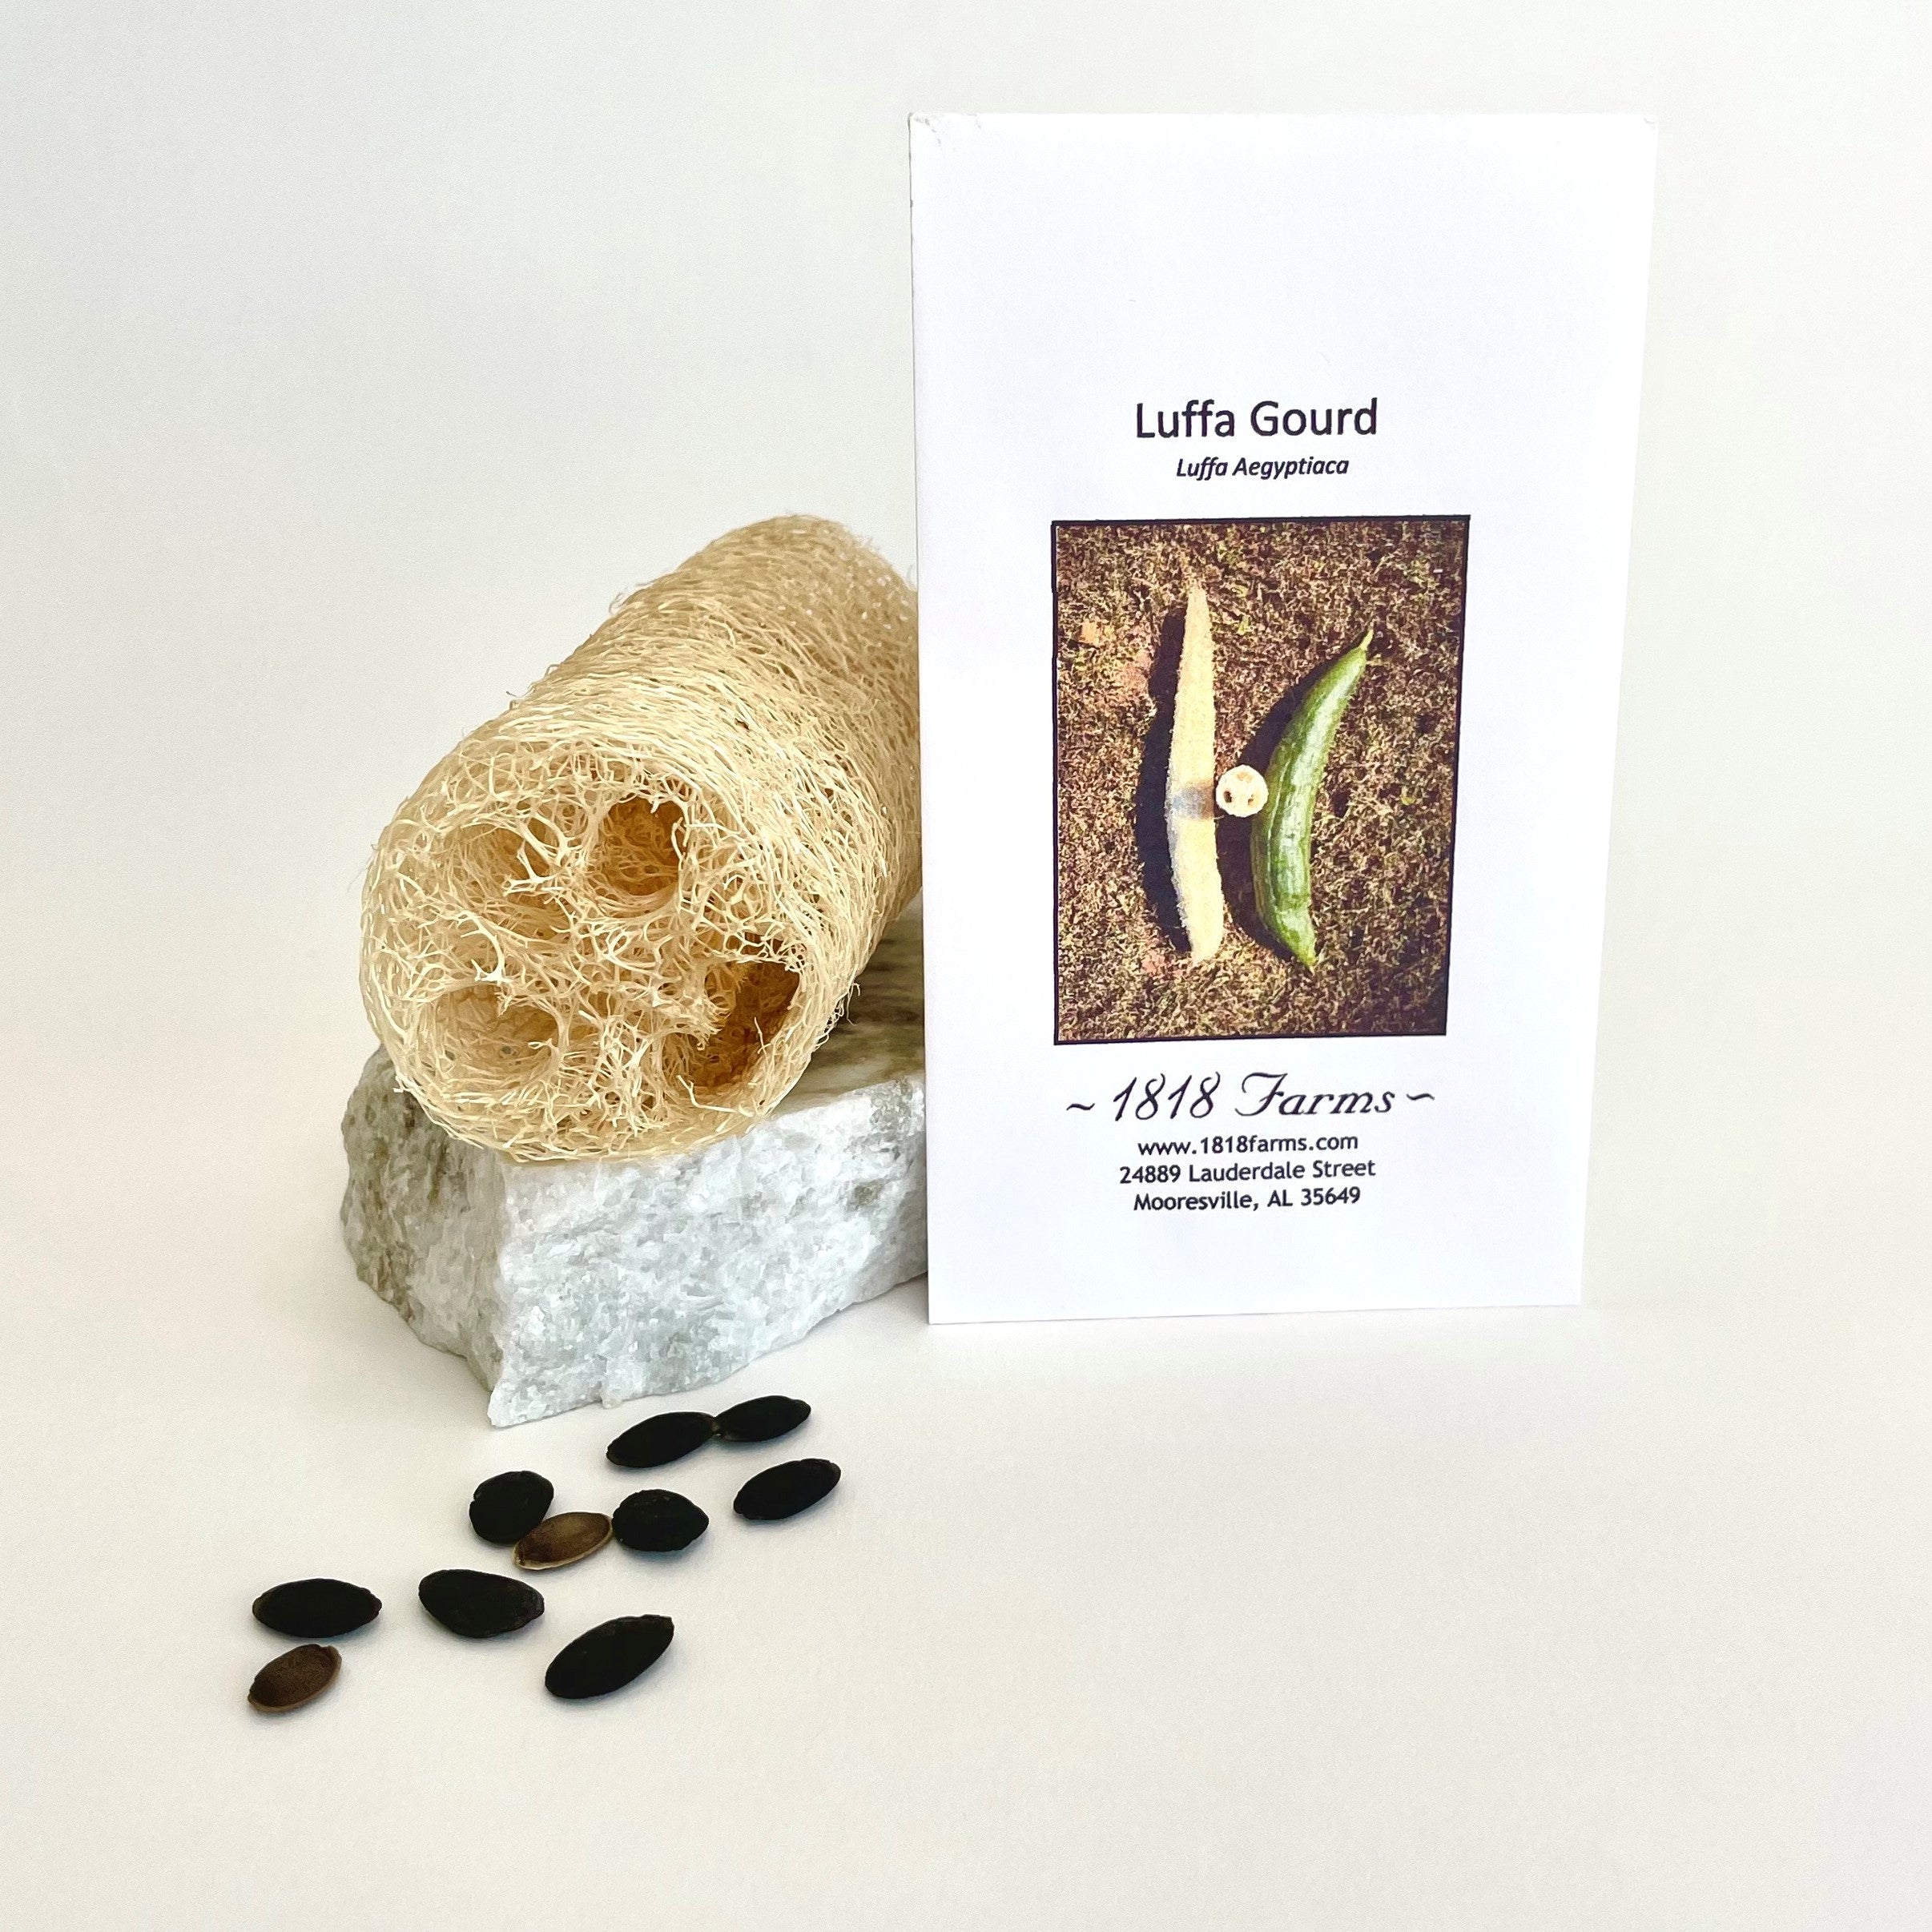 How to Grow, Harvest, Peel, and Process Luffa Sponges